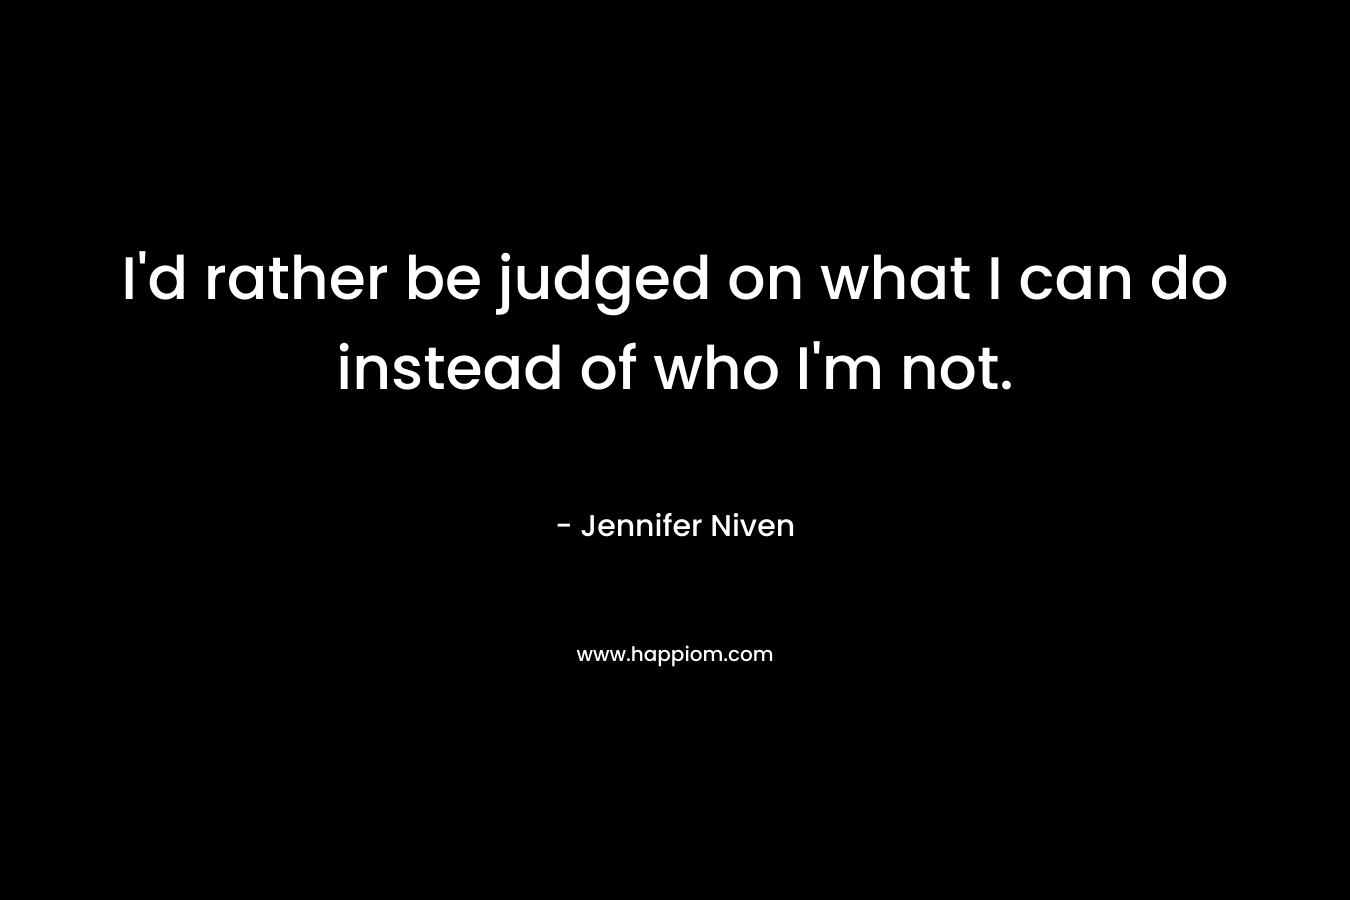 I’d rather be judged on what I can do instead of who I’m not. – Jennifer Niven